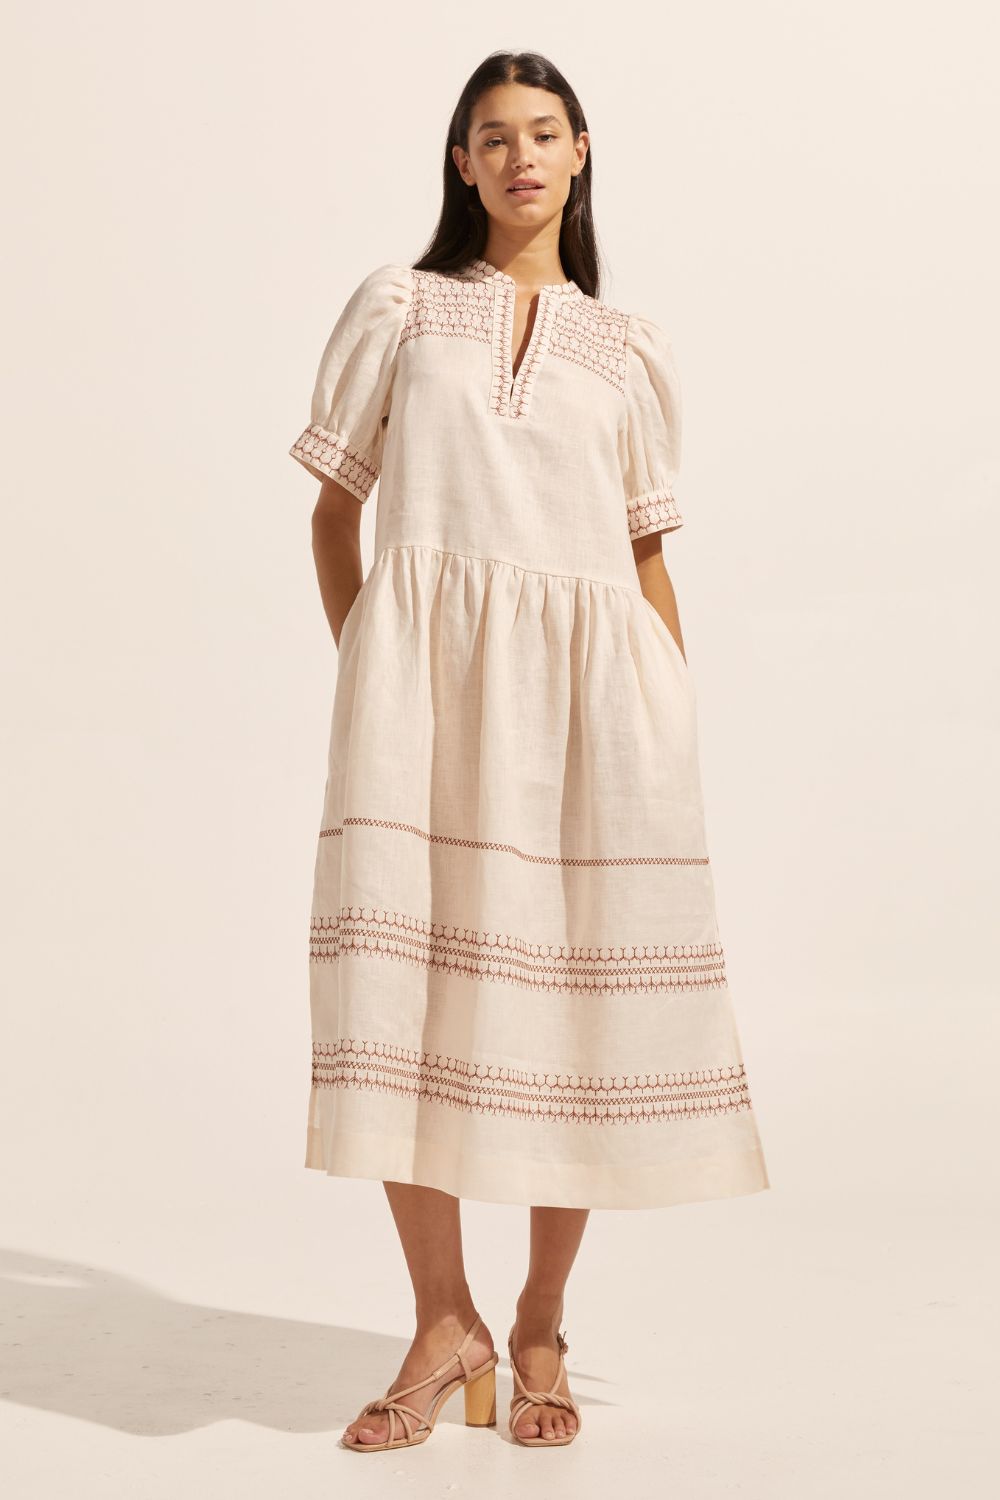 cream, embroidered, midi dress, mid-length sleeve, rounded neckline, side pockets, drop waist, side splits, front image